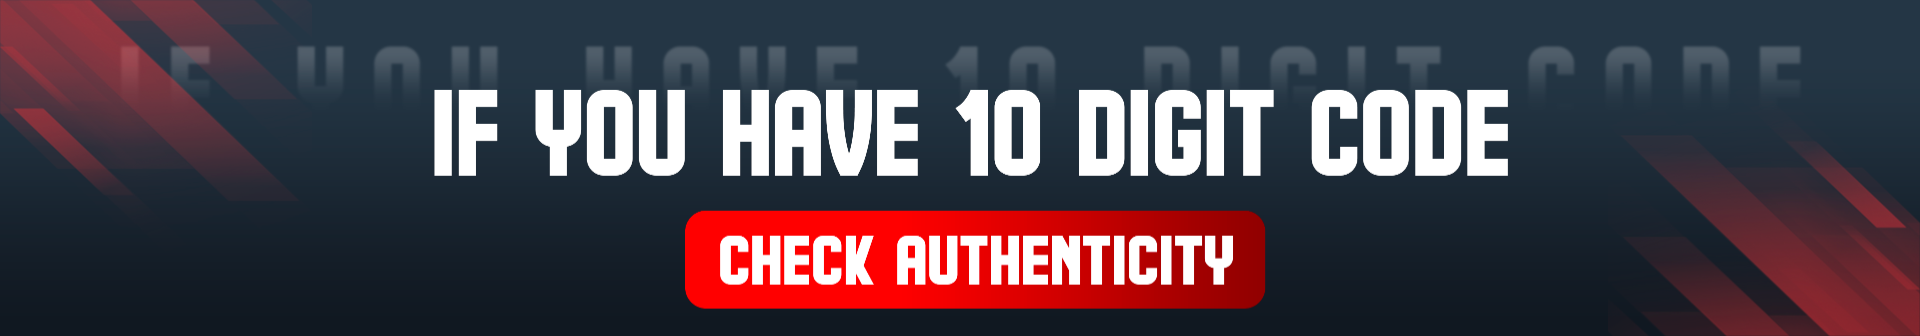 Authenticate - Verify Authenticity of a Product 